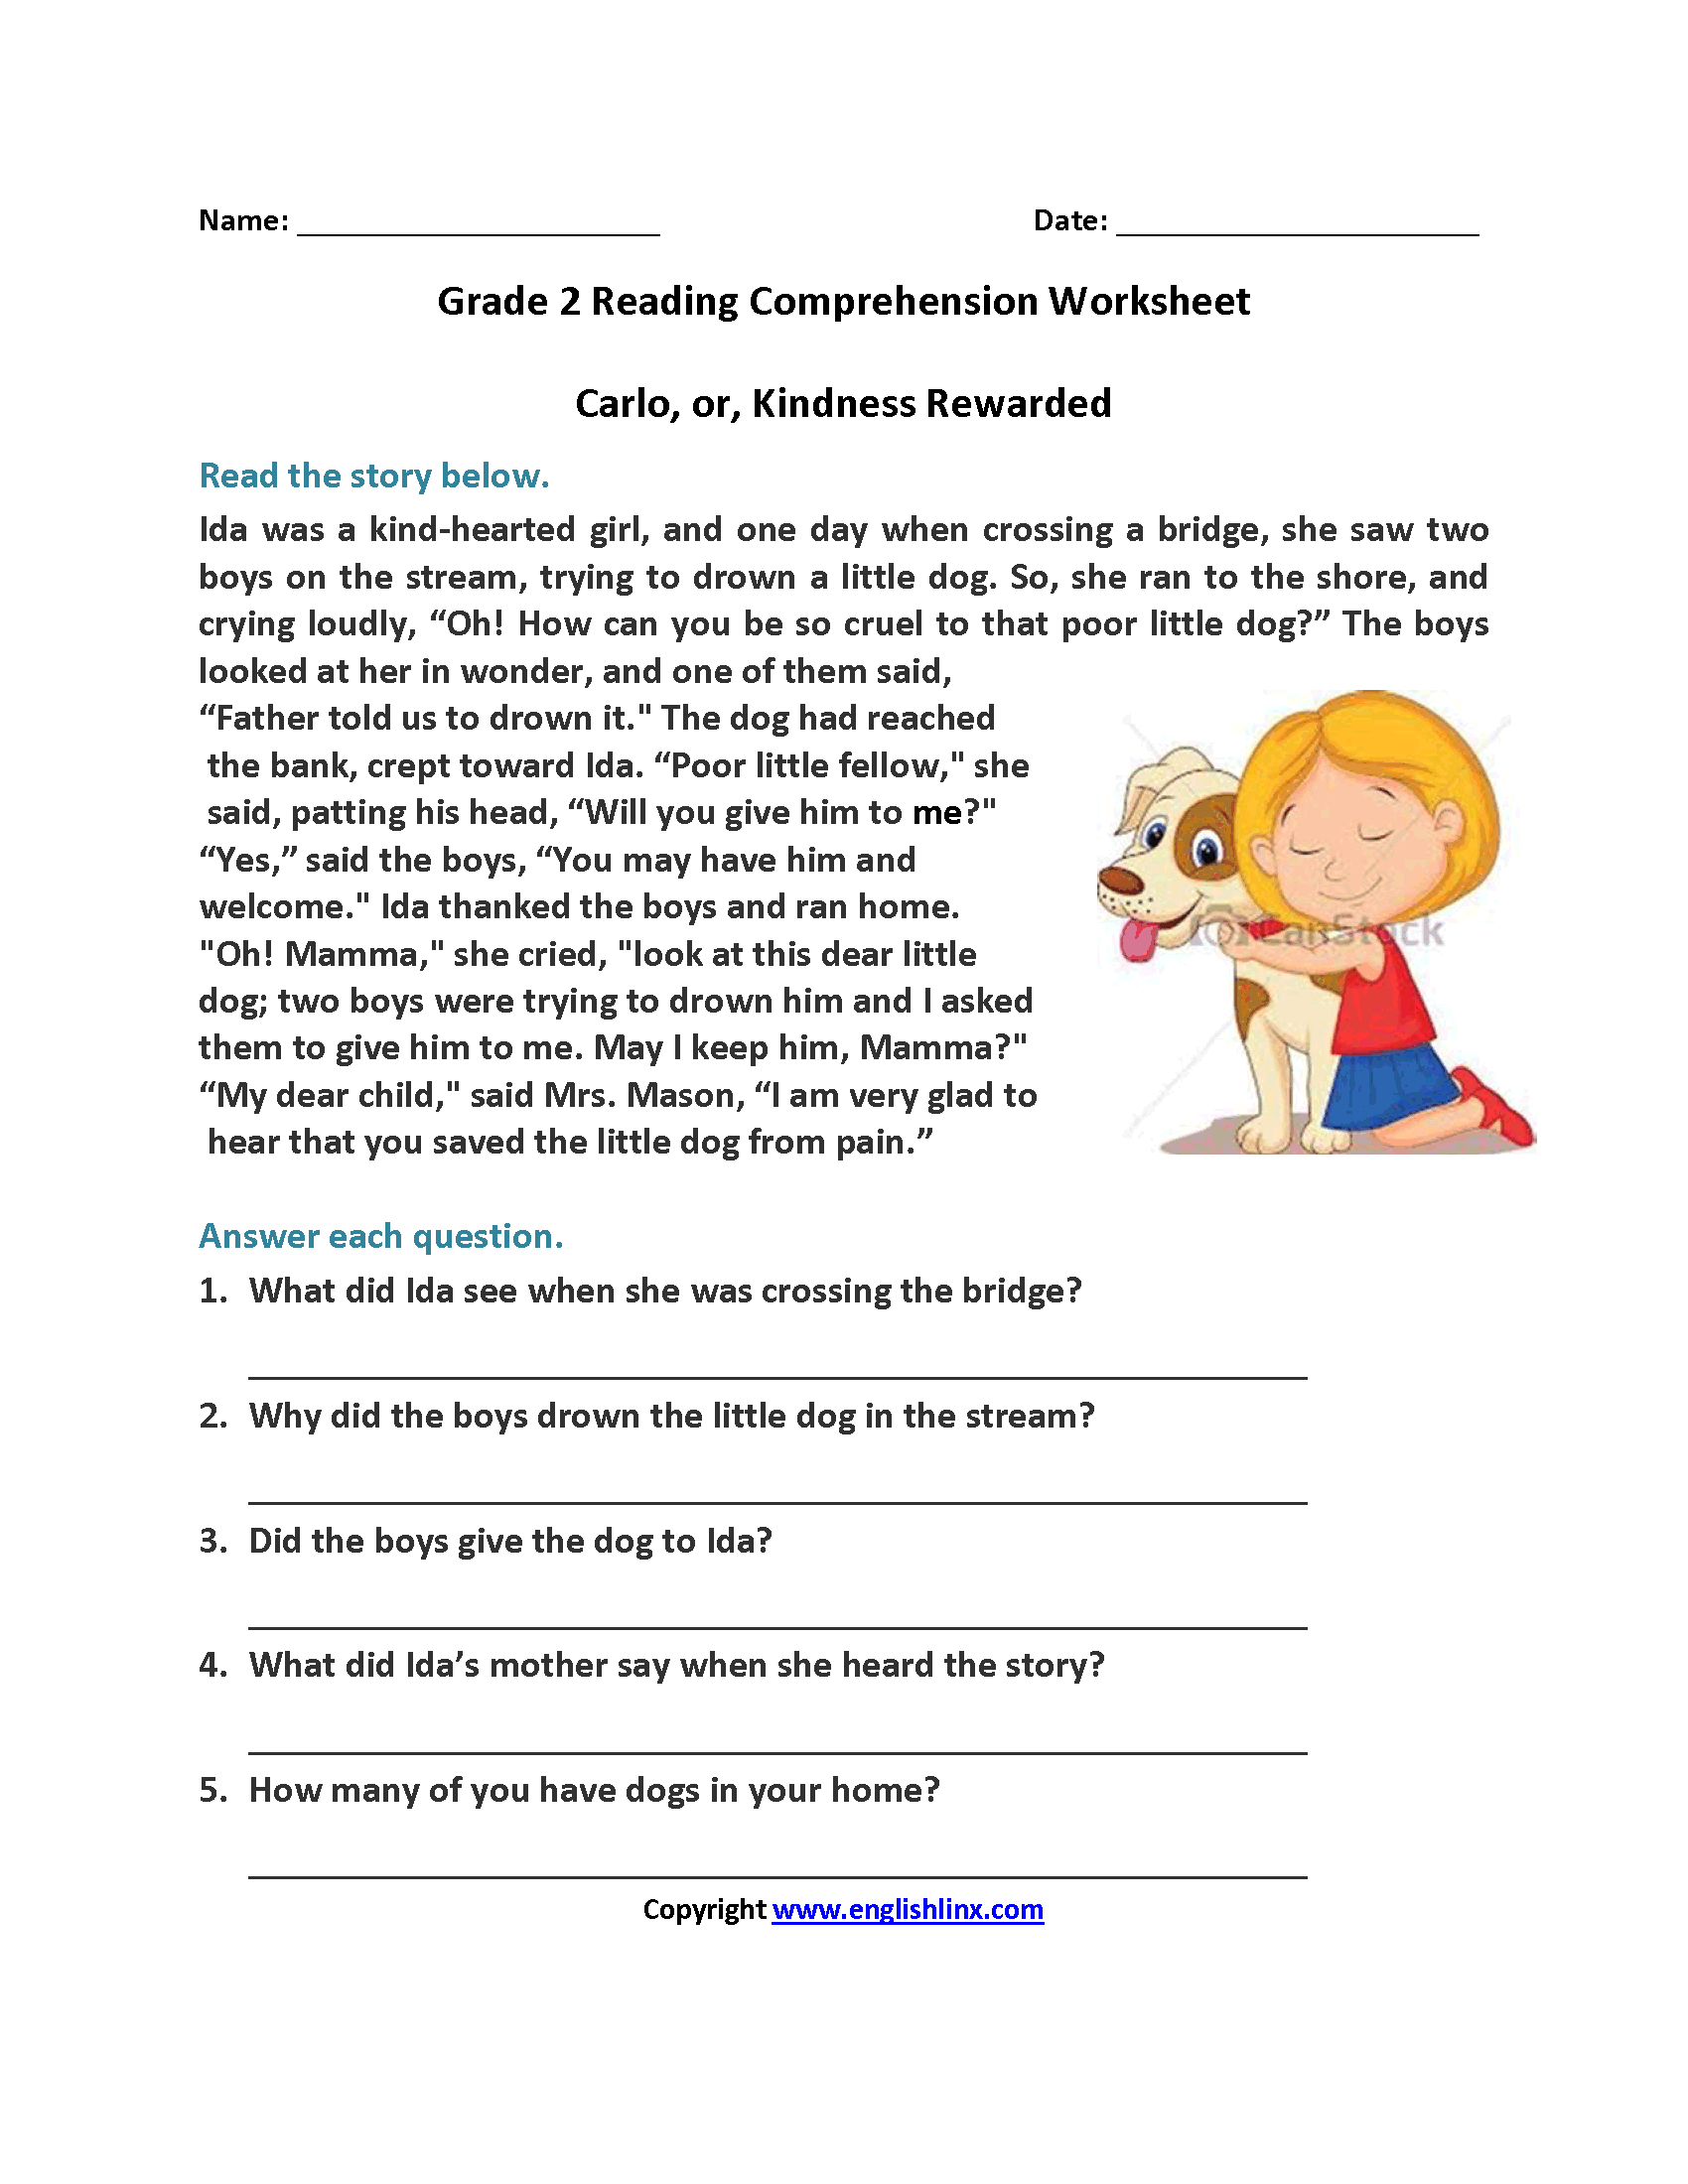 Carlo Or Kindness Rewarded Second Grade Reading Worksheets | Reading - Free Printable Worksheets Reading Comprehension 5Th Grade